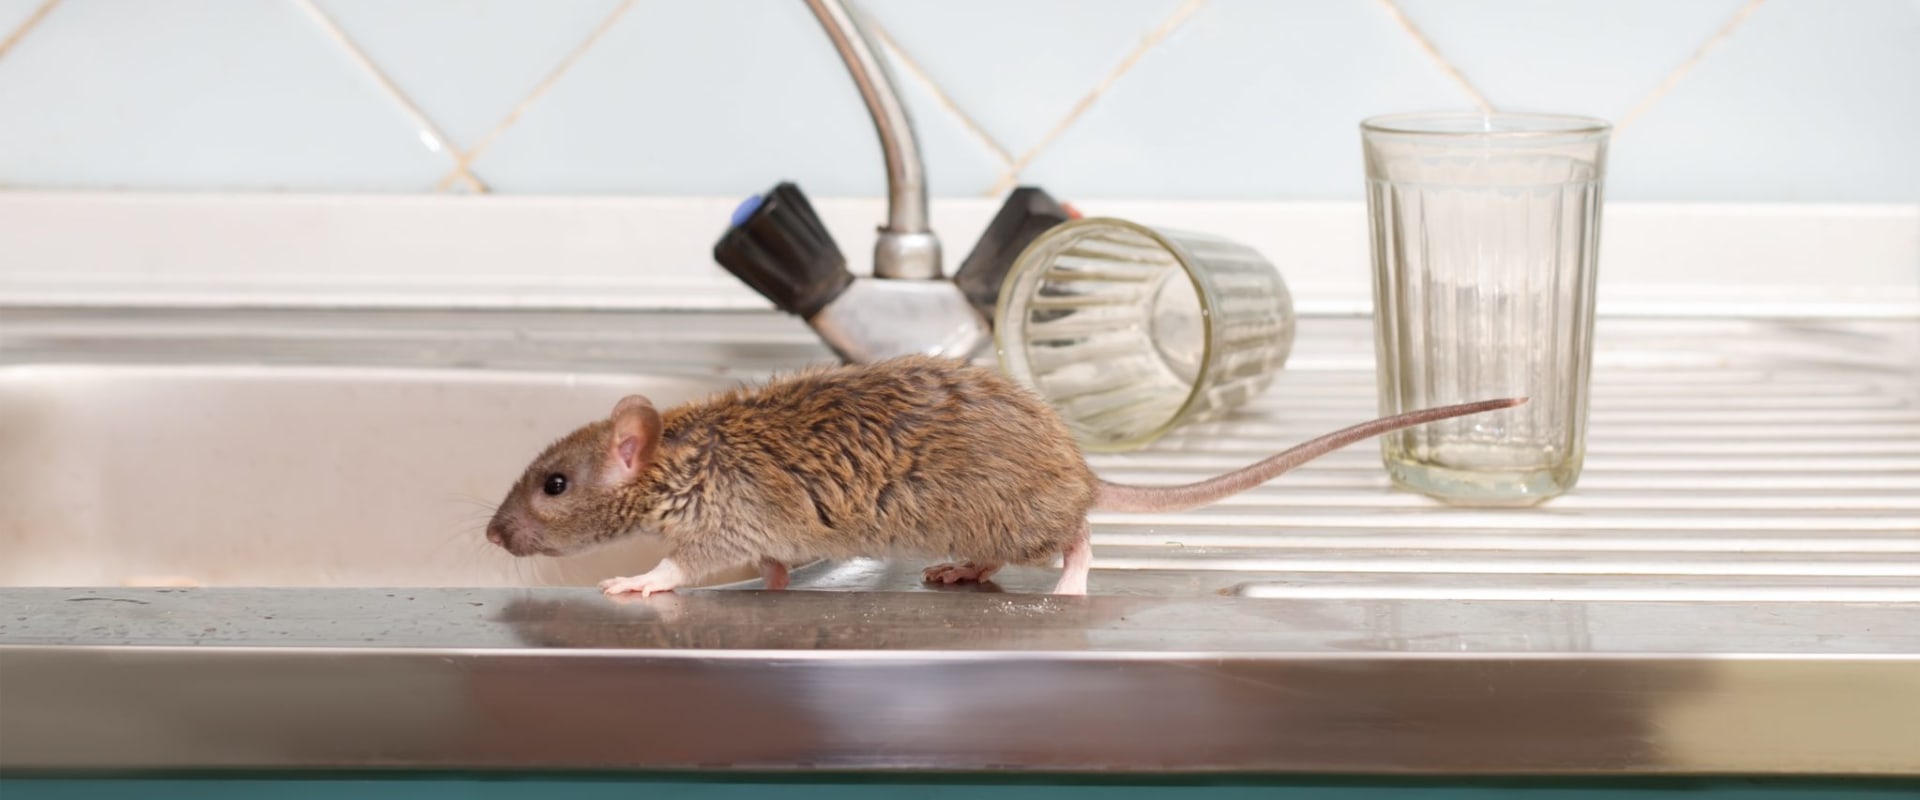 What is the most preferred method of controlling rodent populations?